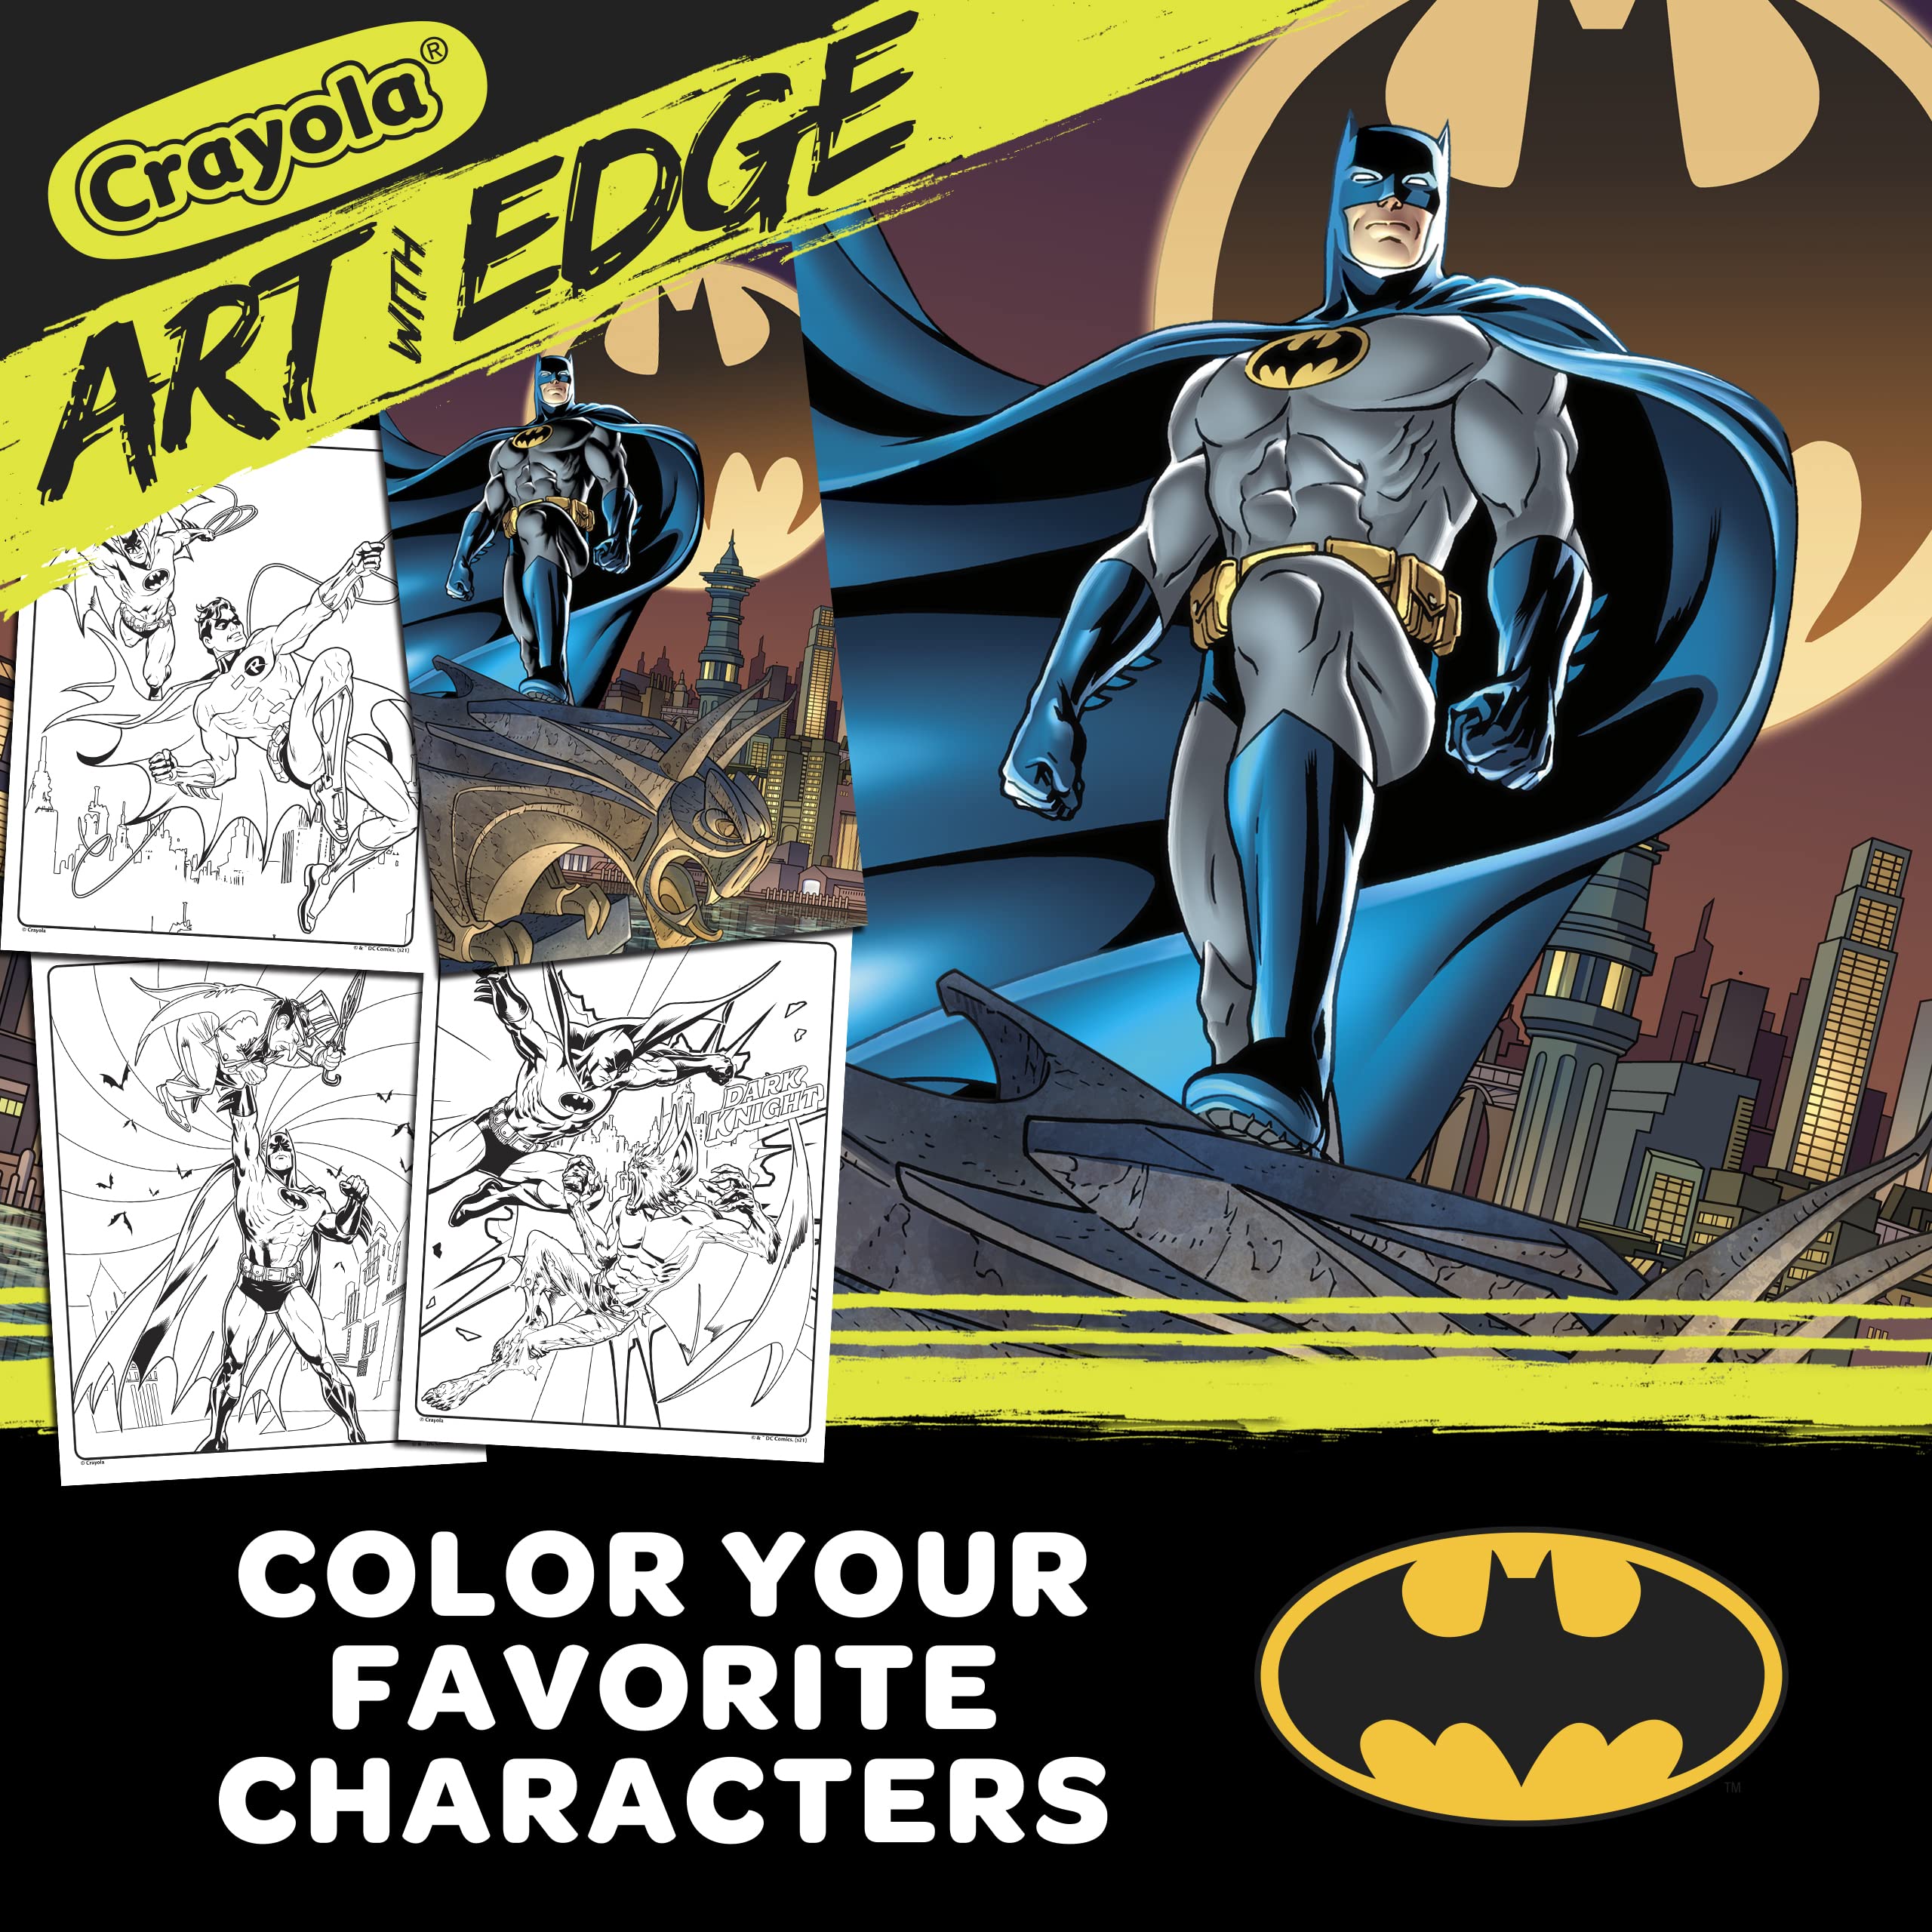 Crayola Batman Coloring Book Pages, 1 Full Color Batman Poster, 28 Pages